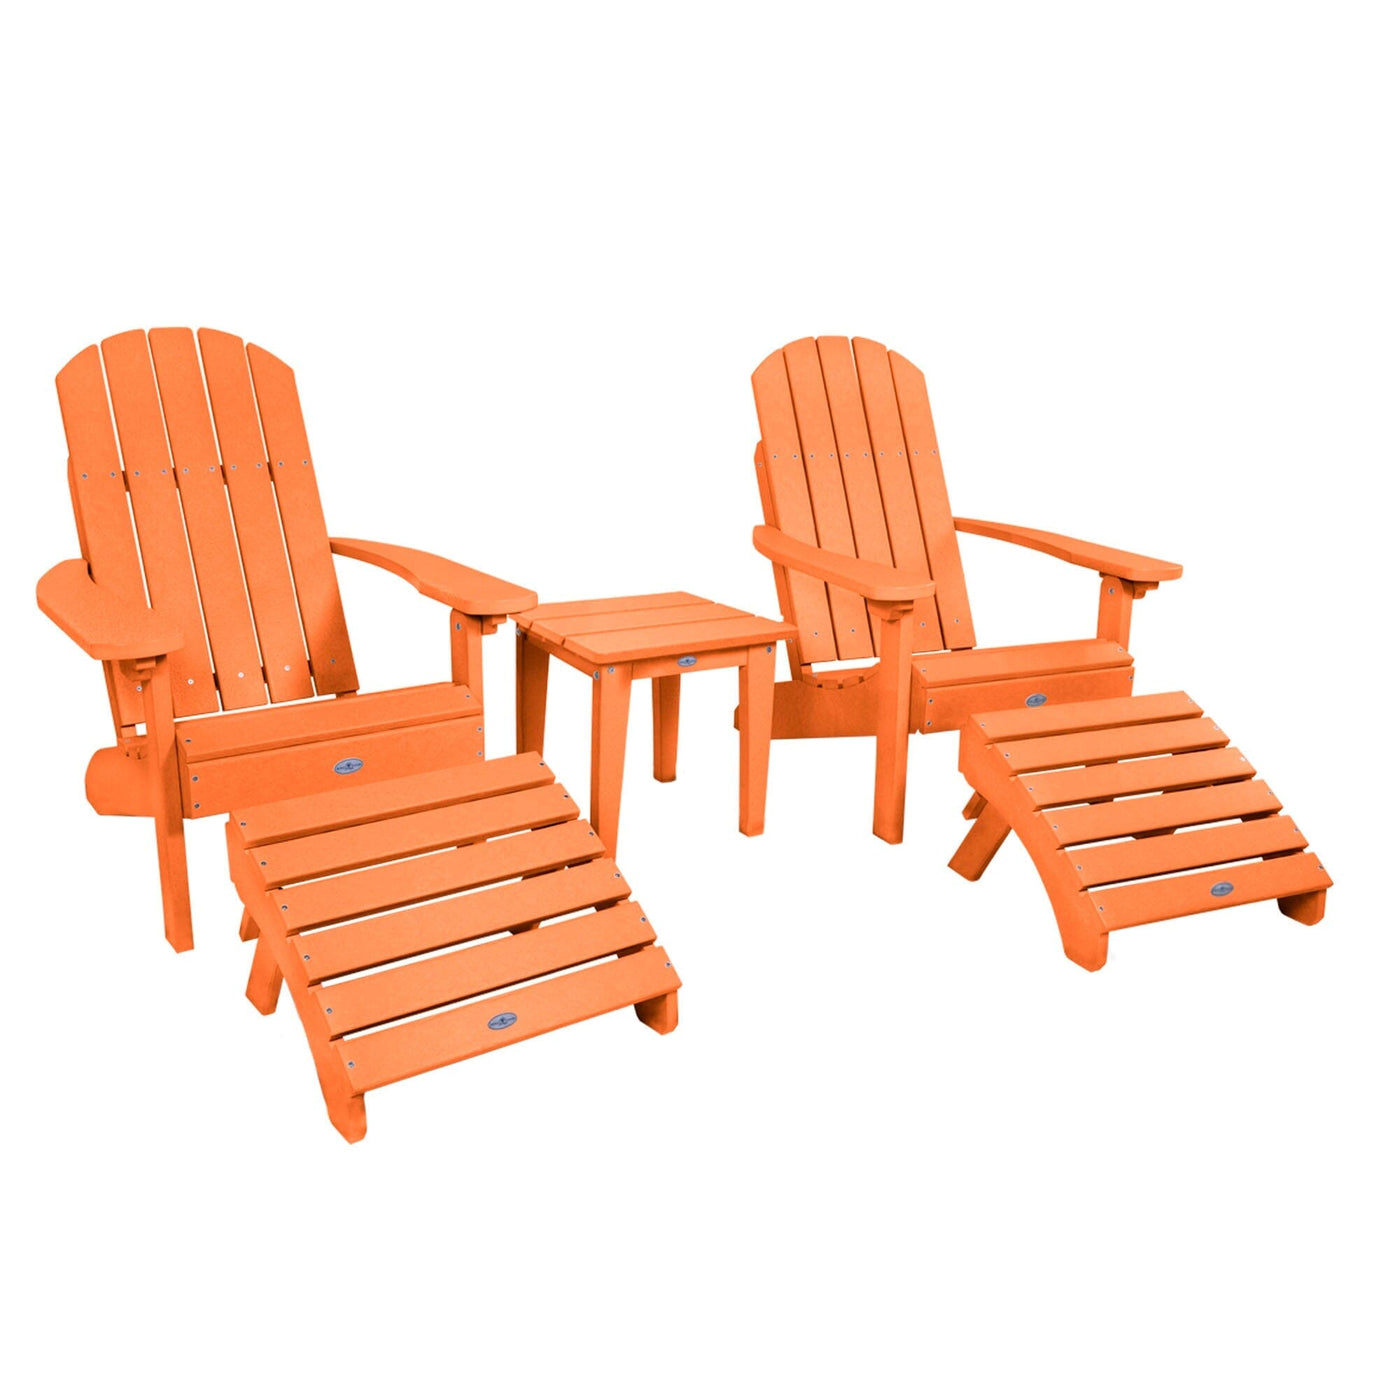 Two Cape Classic Adirondack Chairs, Side Table and Ottoman 5 pc Set Kitted Set Bahia Verde Outdoors Citrus Orange 